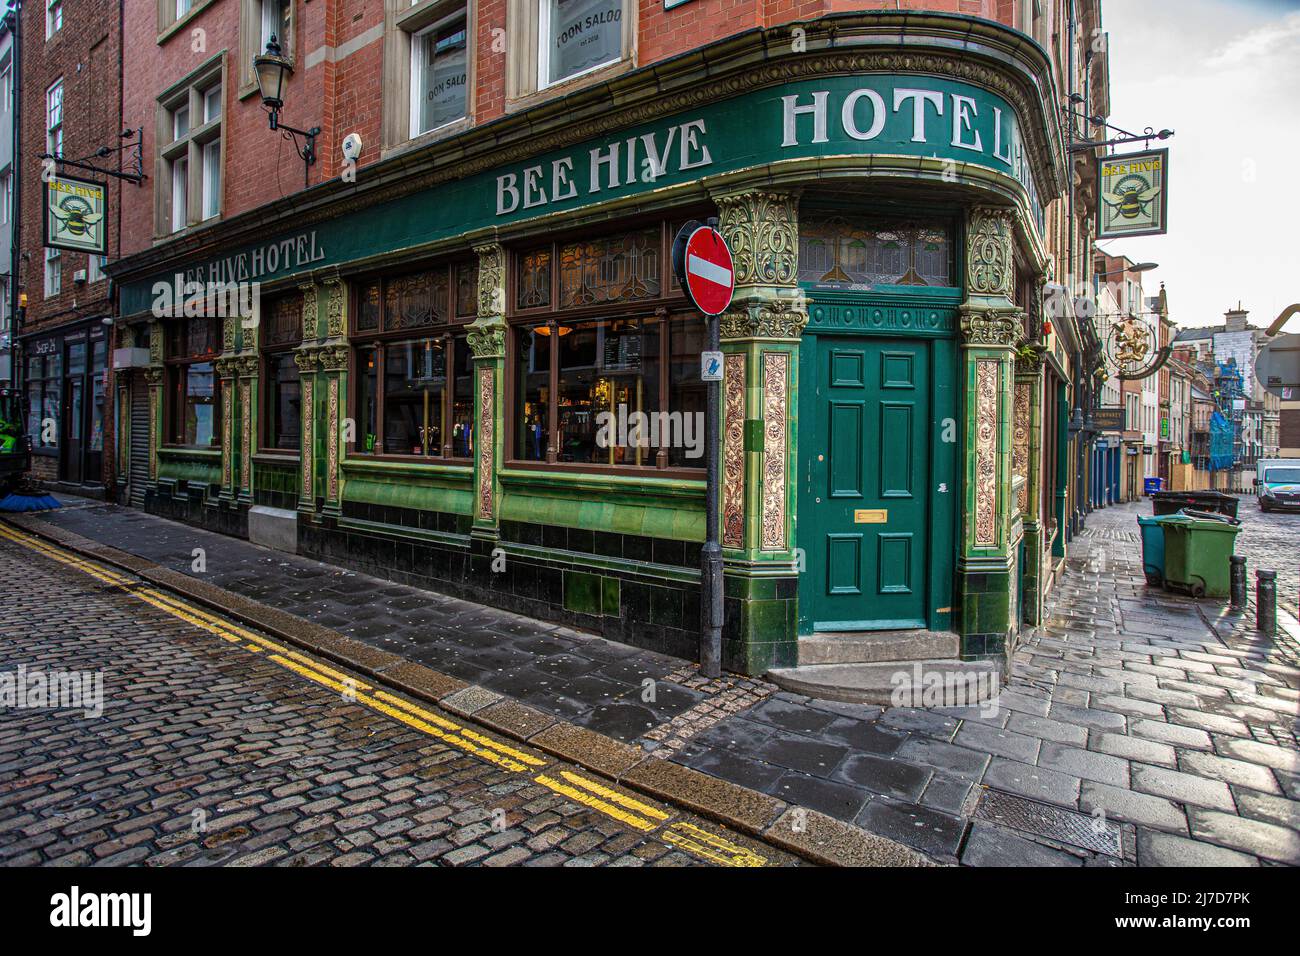 The Beehive Hotel public house exterior is faced with green and yellow glazed tiles . High Bridge , Newcastle upon Tyne, England. Stock Photo